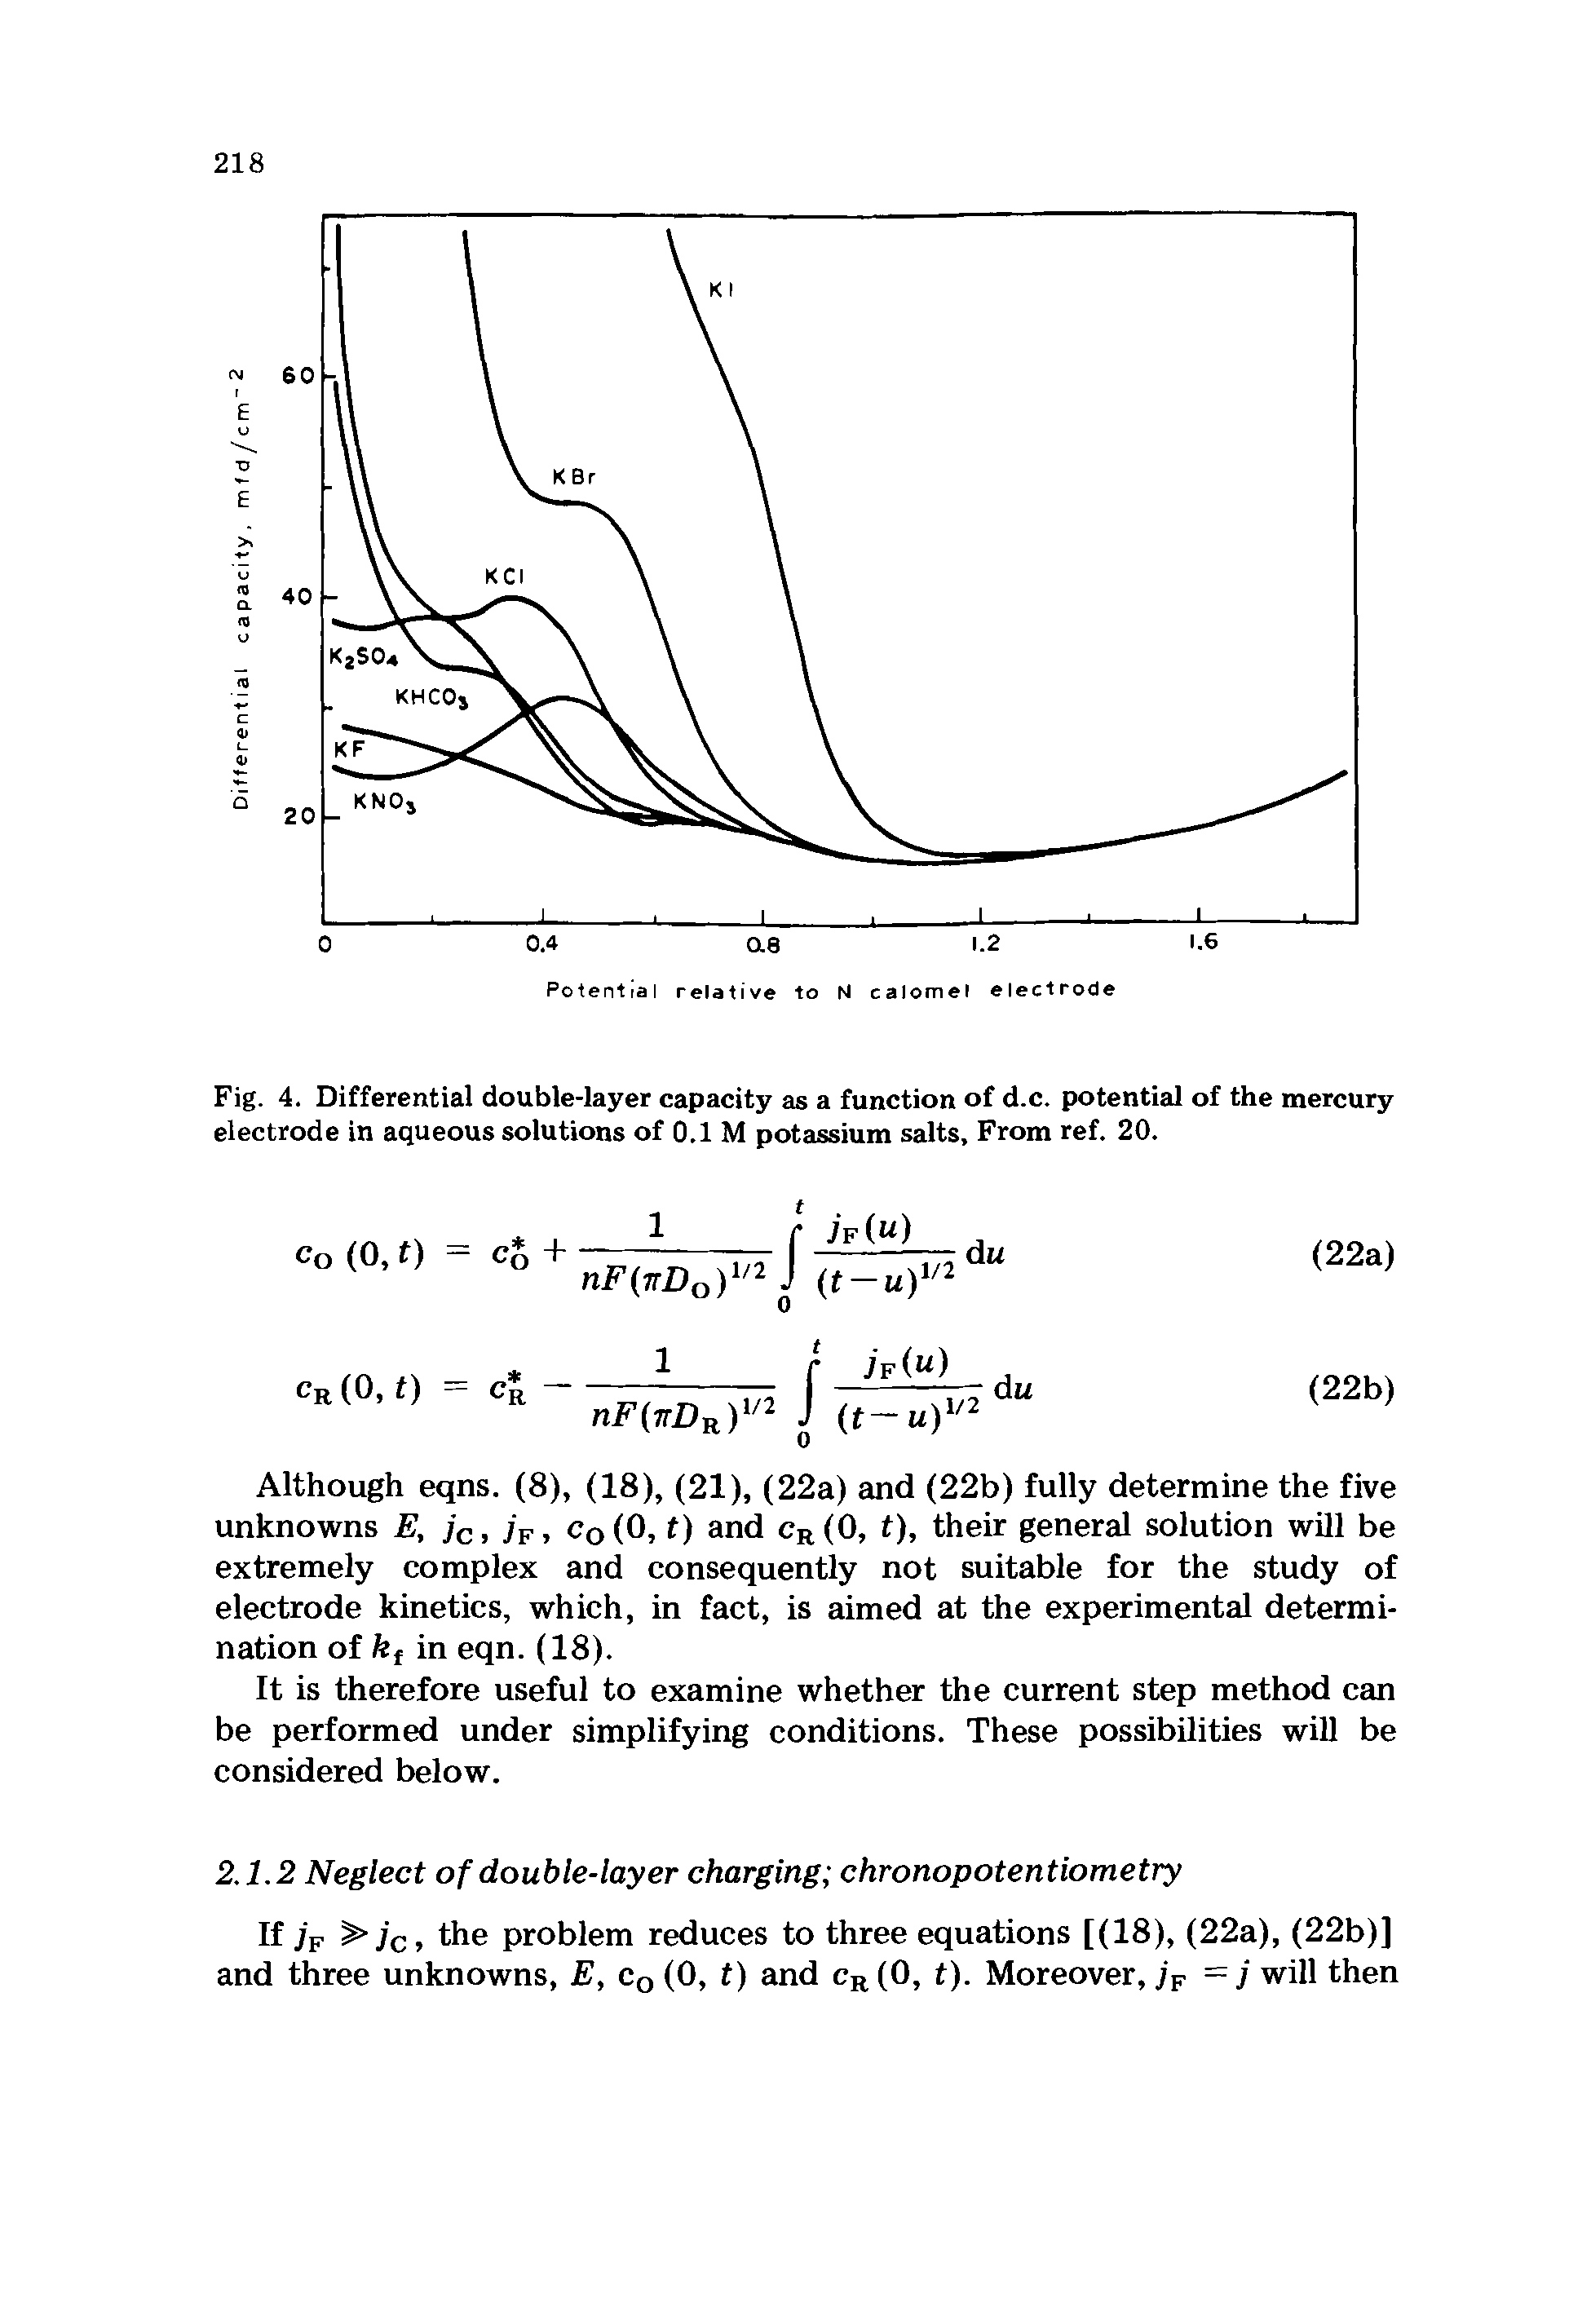 Fig. 4. Differential double-layer capacity as a function of d.c. potential of the mercury electrode in aqueous solutions of 0.1 M potassium salts, From ref. 20.